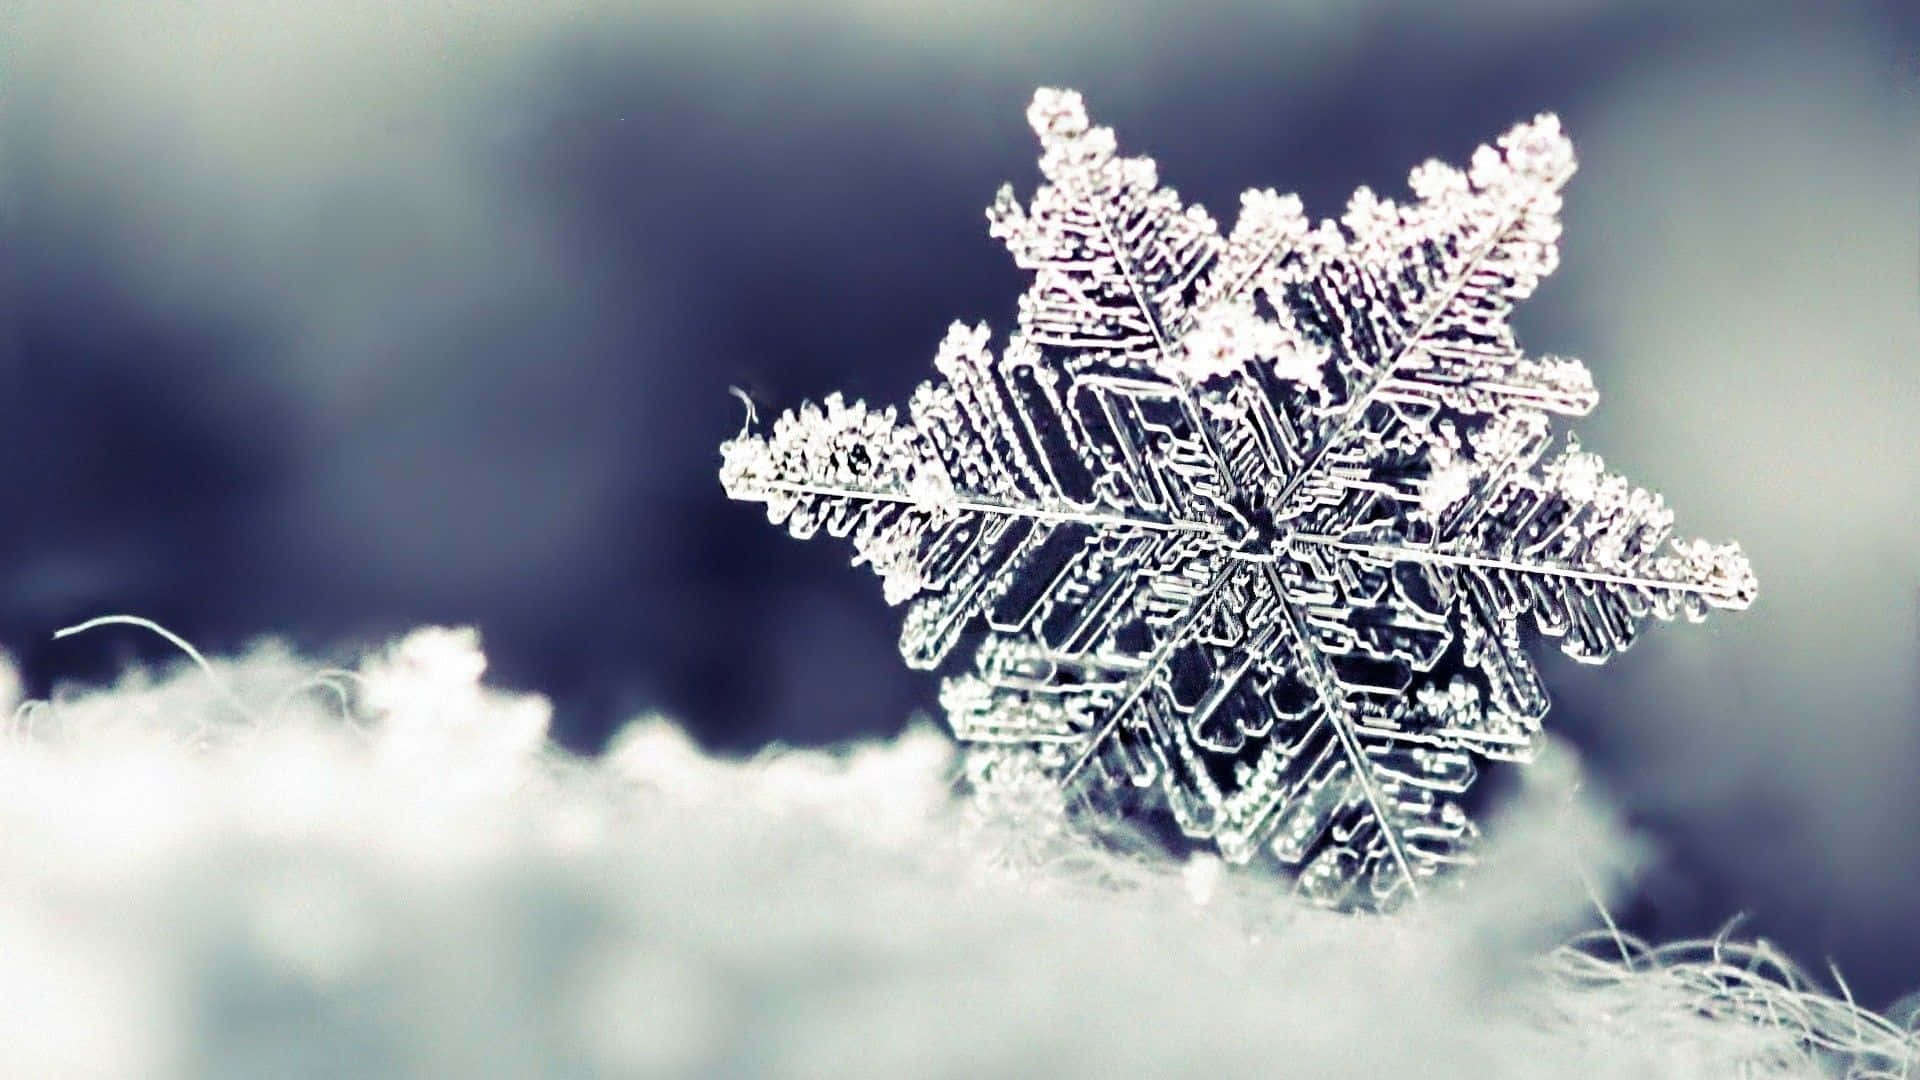 Enjoy the natural beauty of the winter season with a stunning high resolution snow background